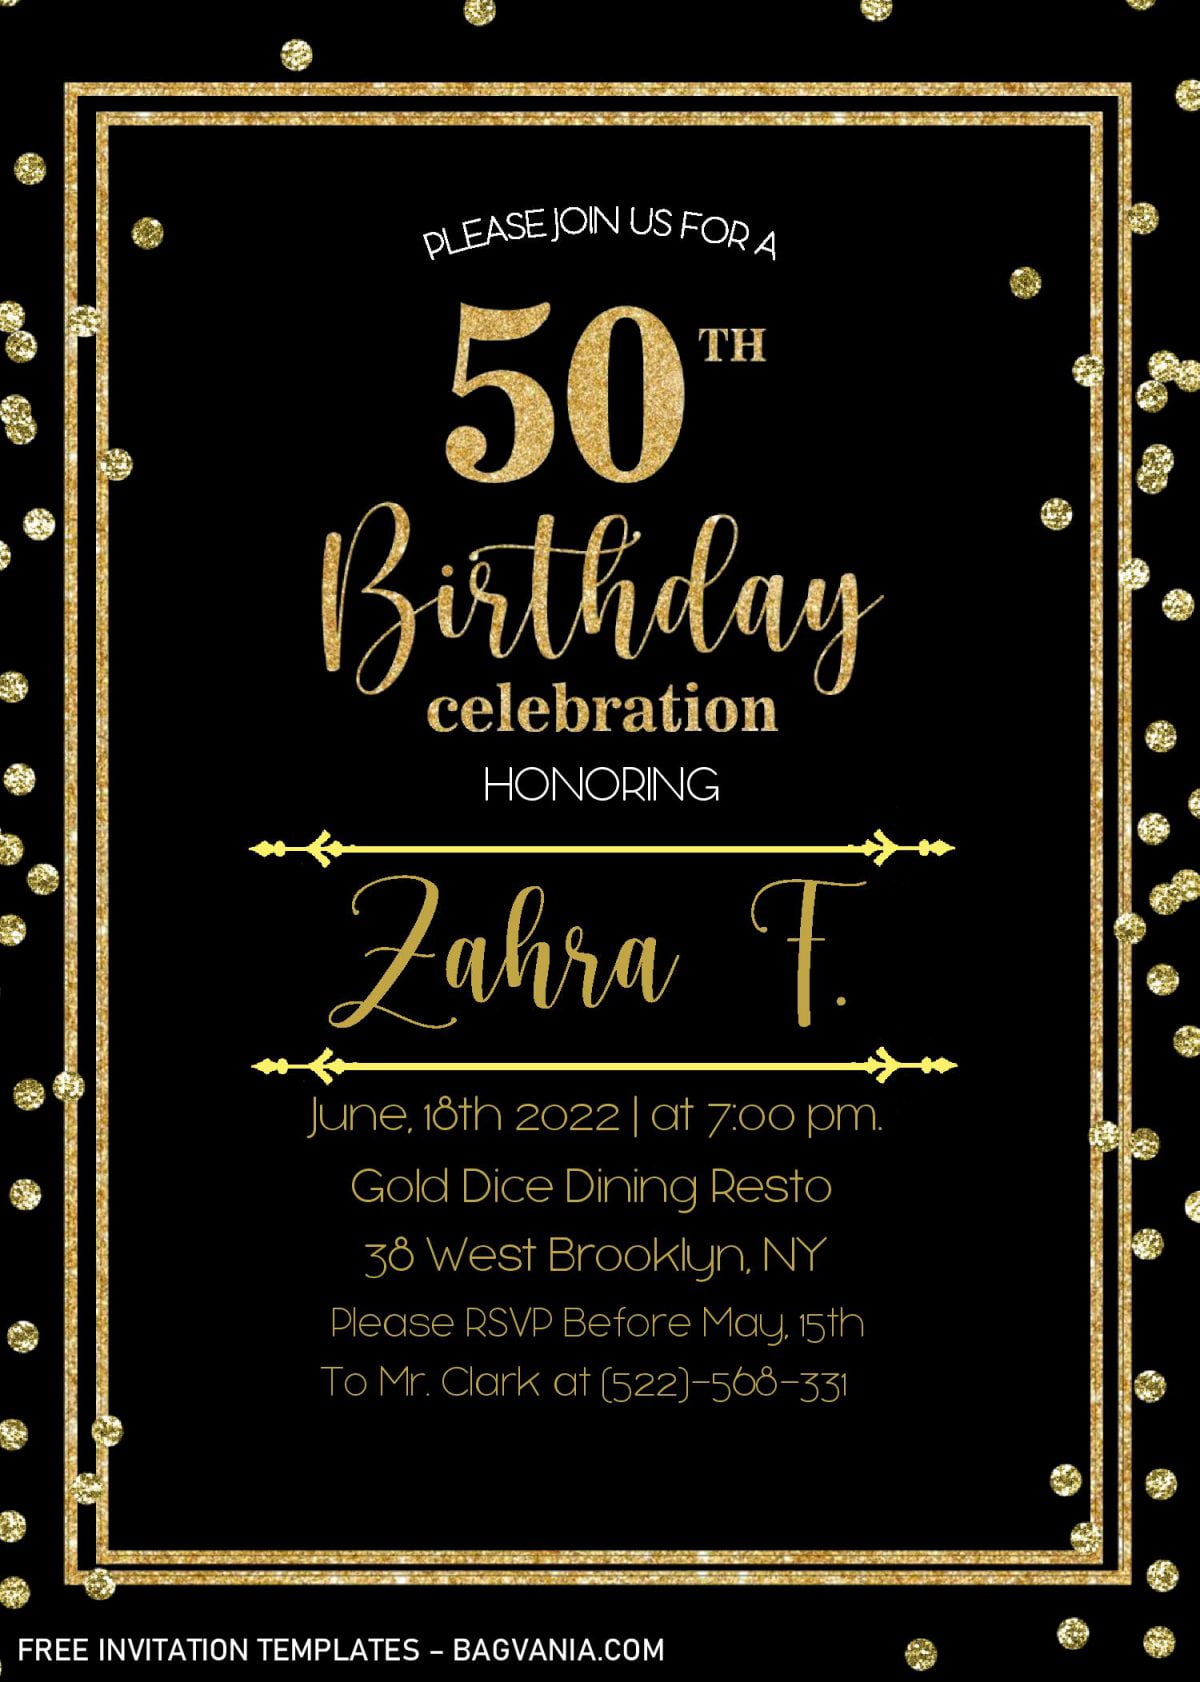 Black And Gold 50th Birthday Invitation Templates - Editable With MS Word and has Gold Glitter